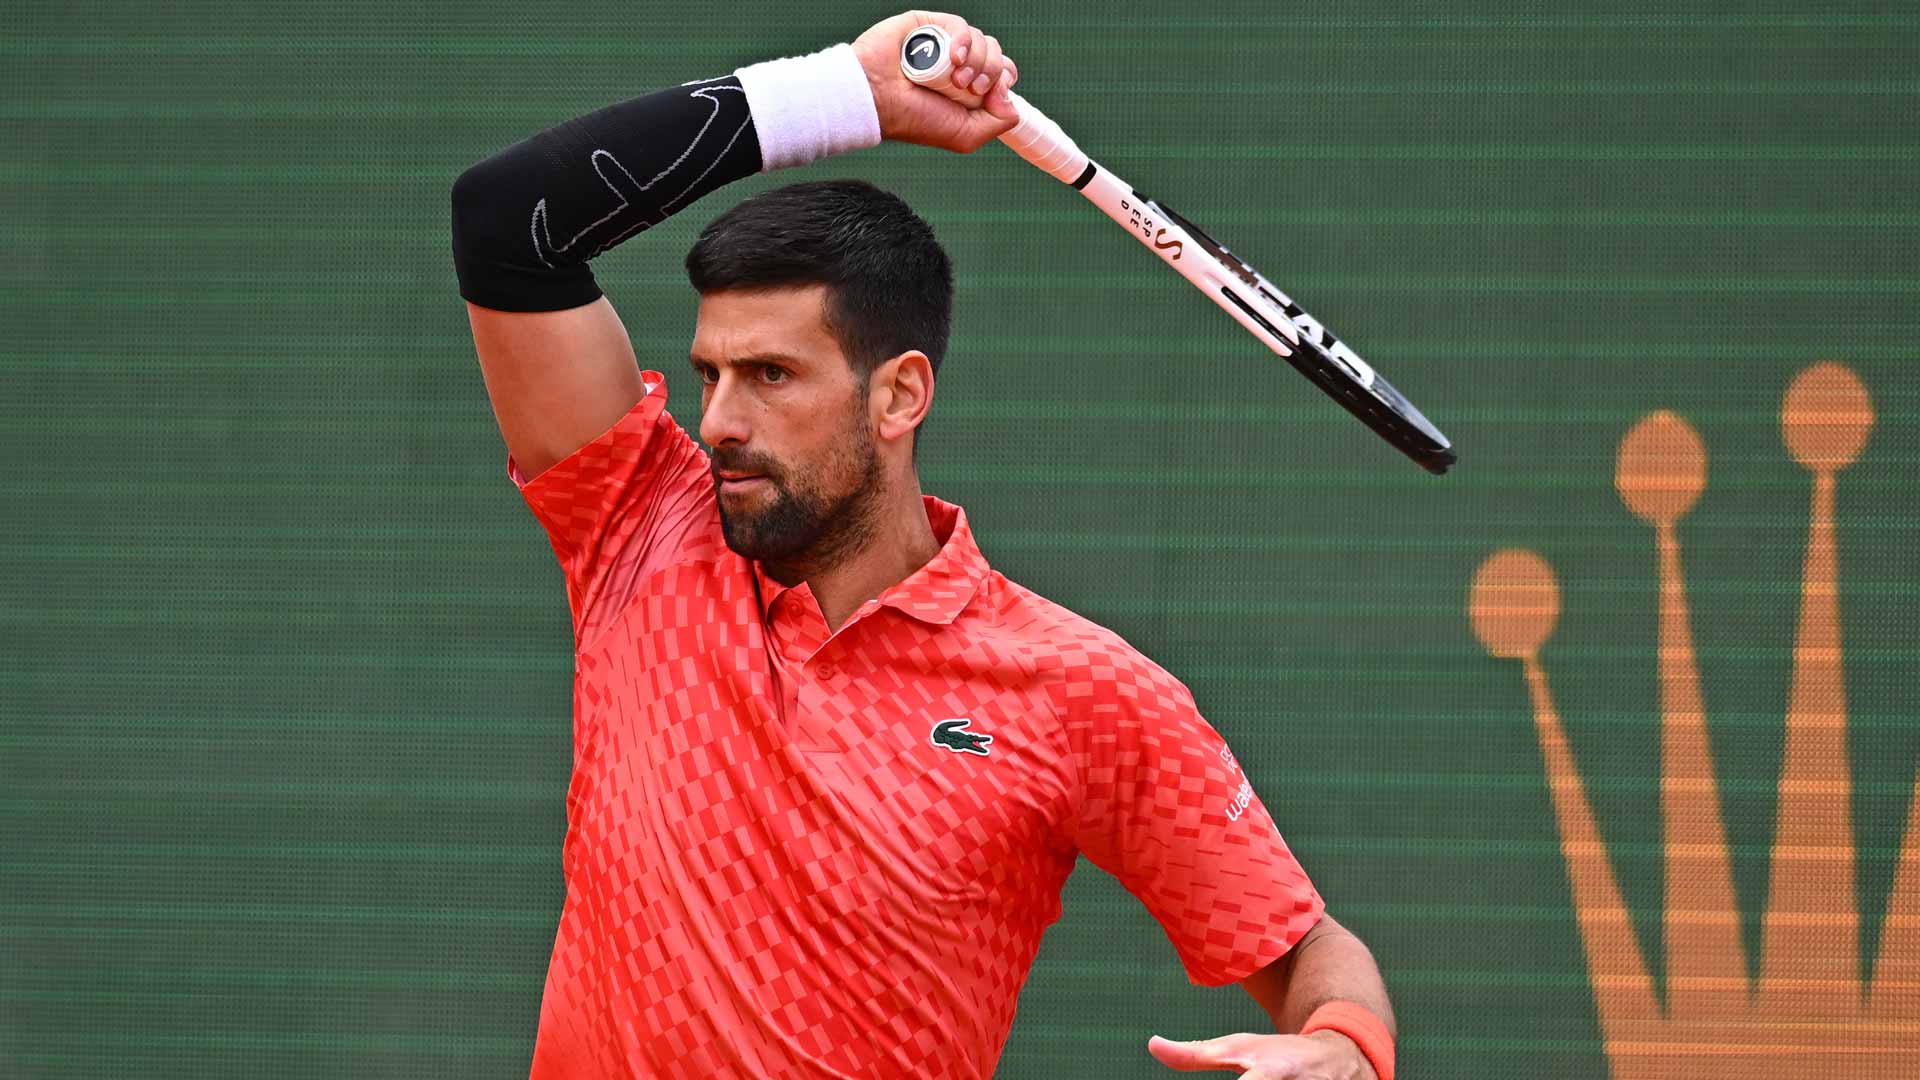 French Open 2023: Novak Djokovic expressed his desire to clinch a record 23rd Grand Slam at this year's Roland Garros and overtake his rival Rafael Nadal.